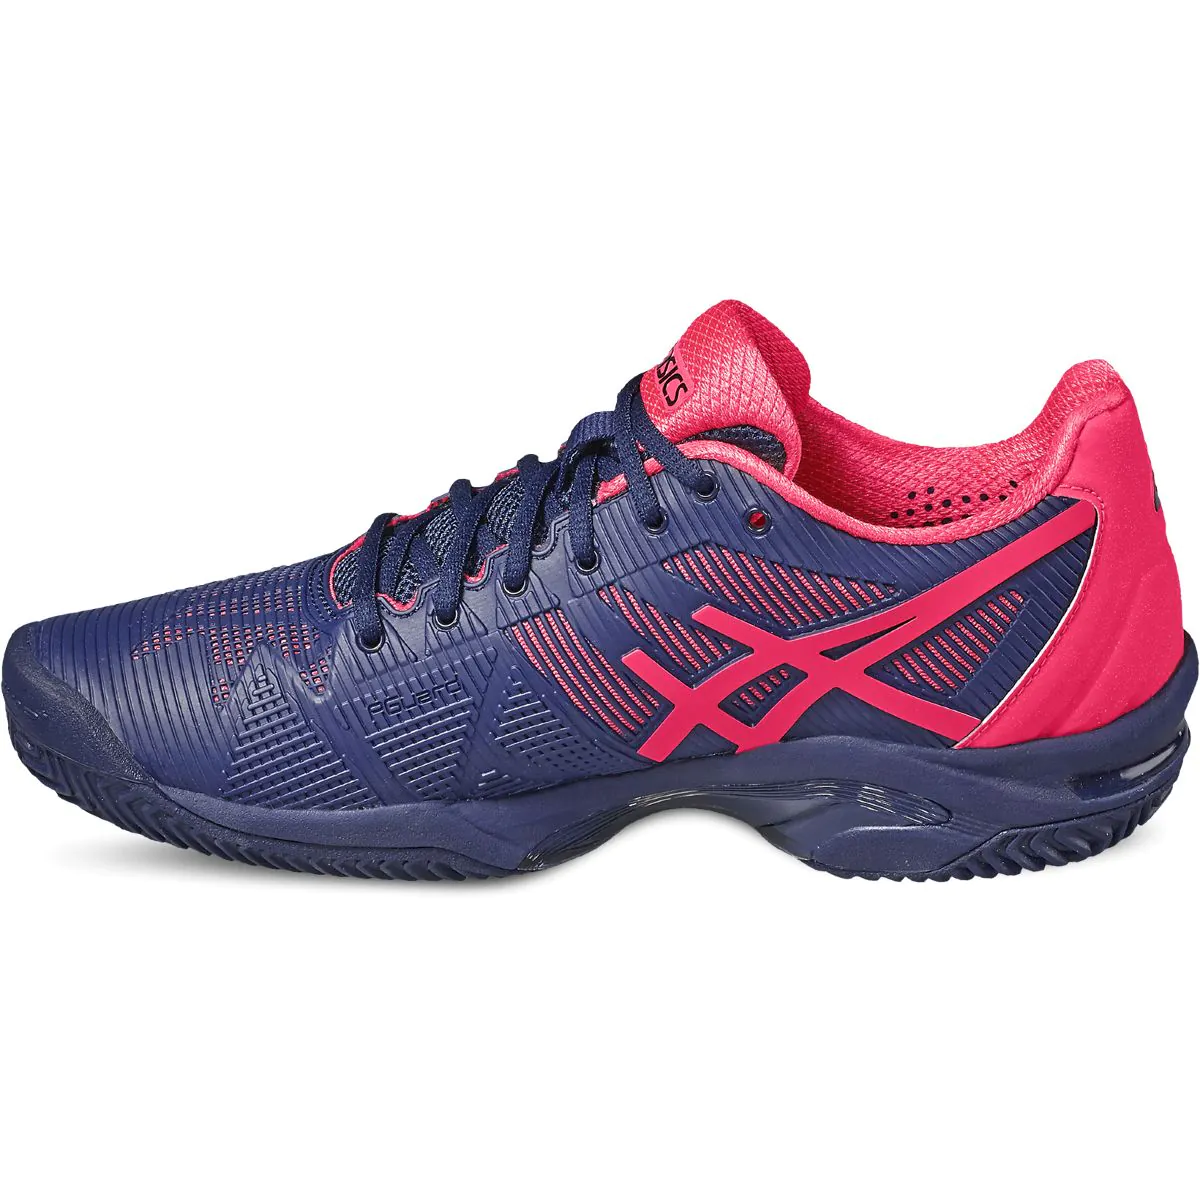 Asics Gel Solution Speed 3 Clay Women's Tennis Shoes E651N-4